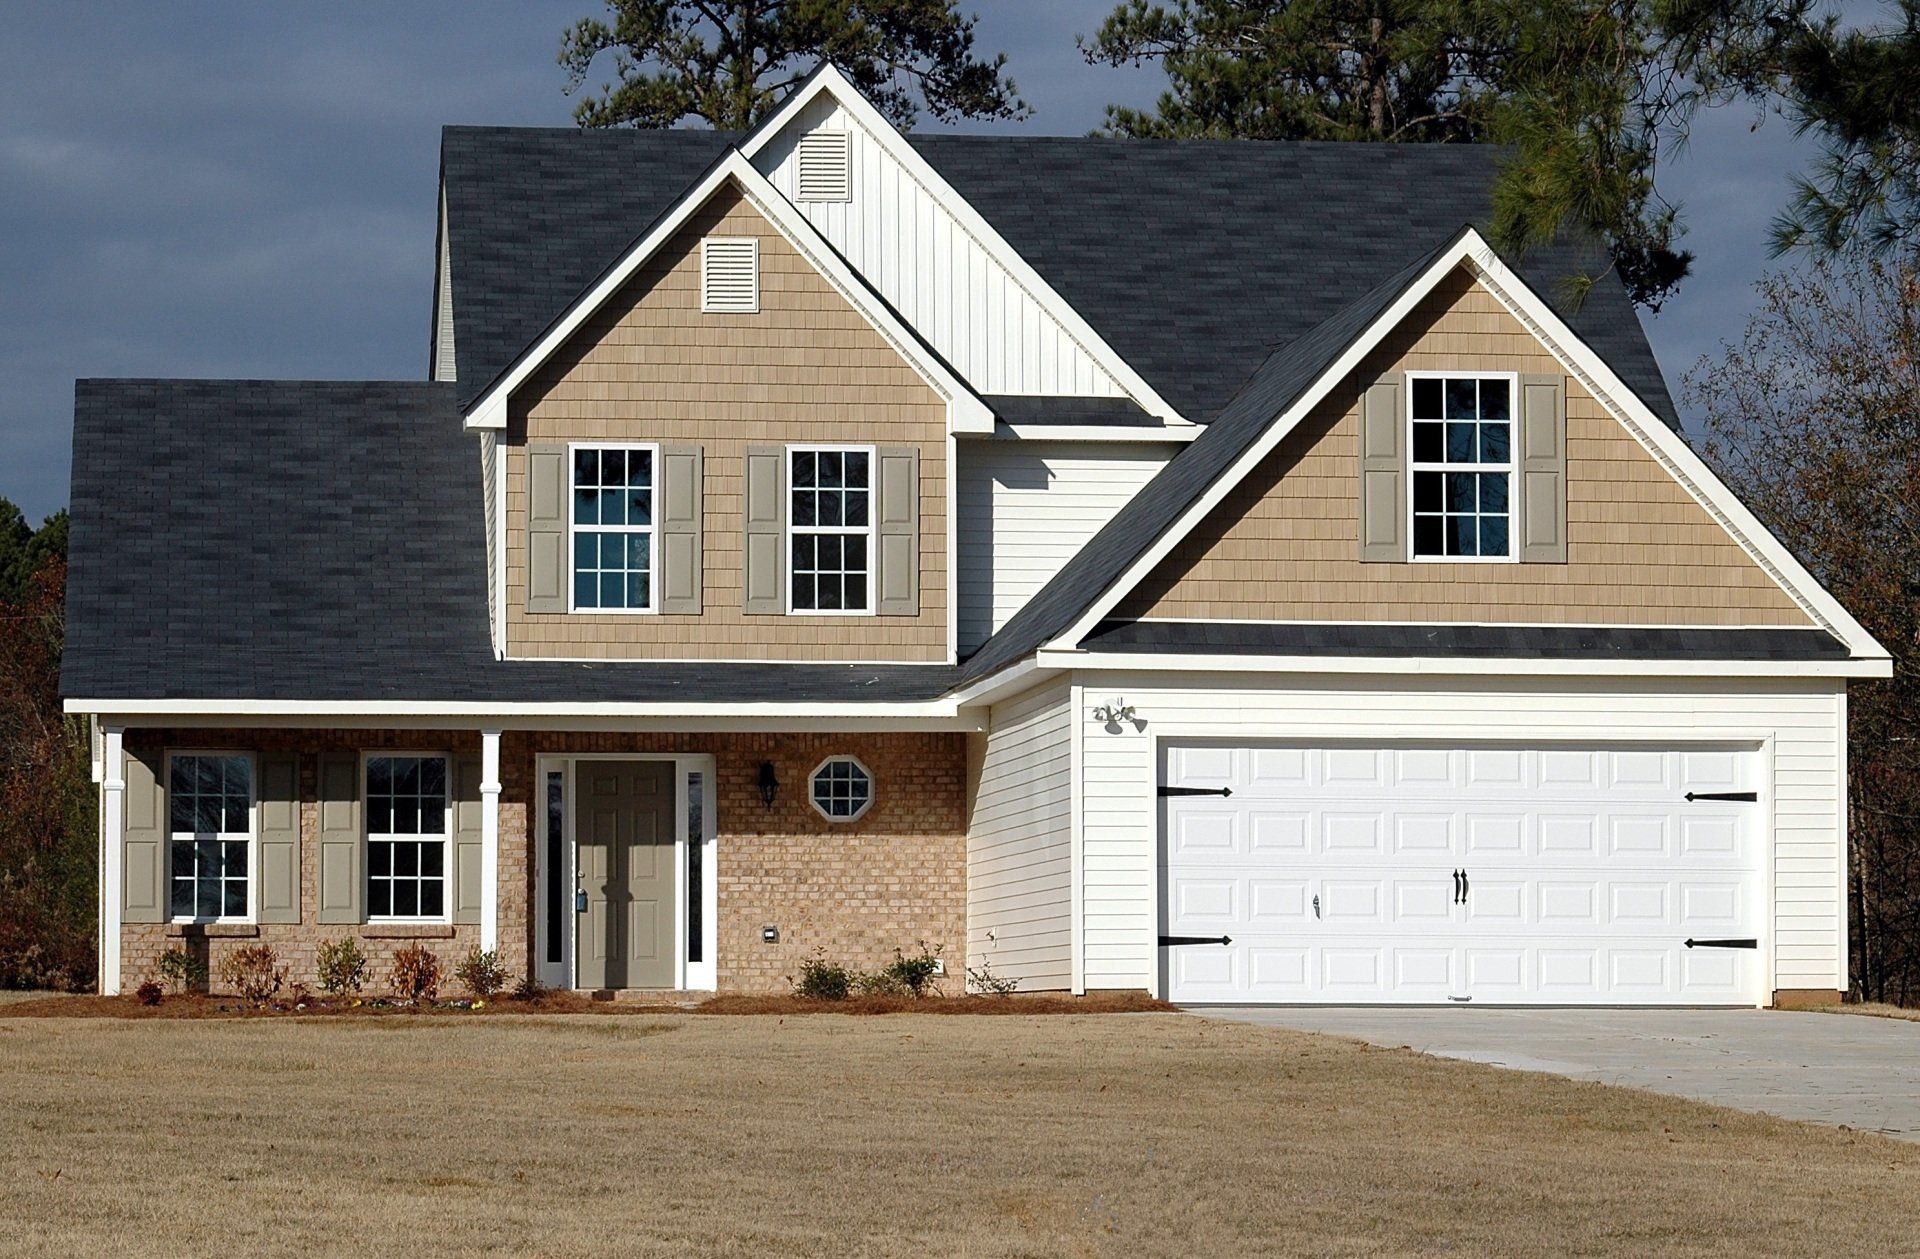 Property Management Company in Charlotte, NC